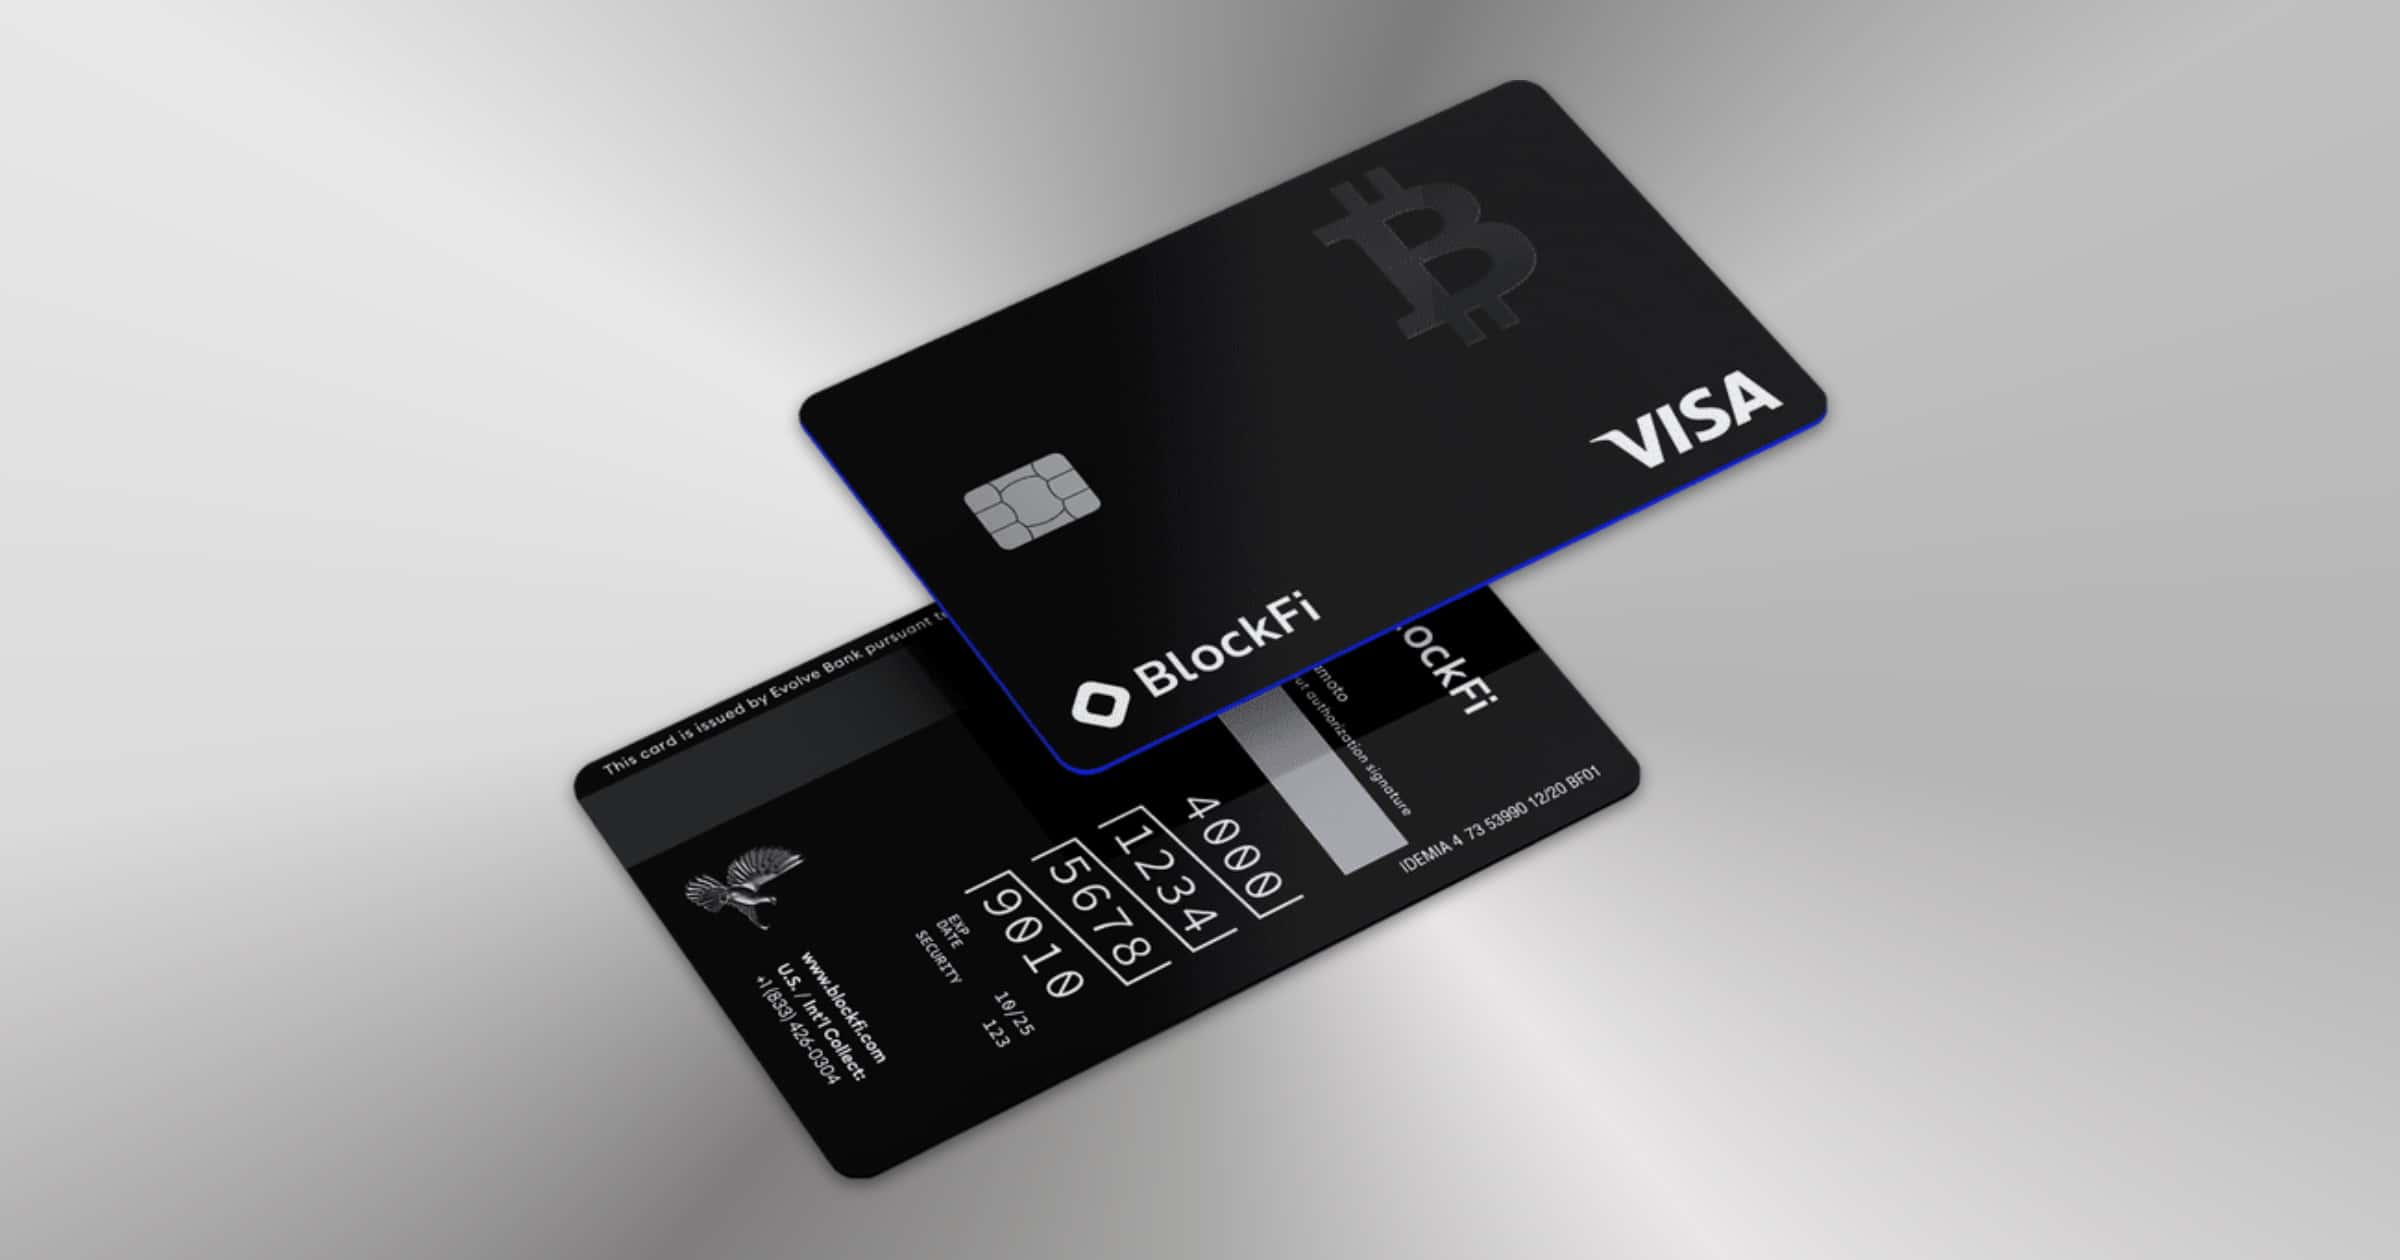 which credit card accepts crypto.com